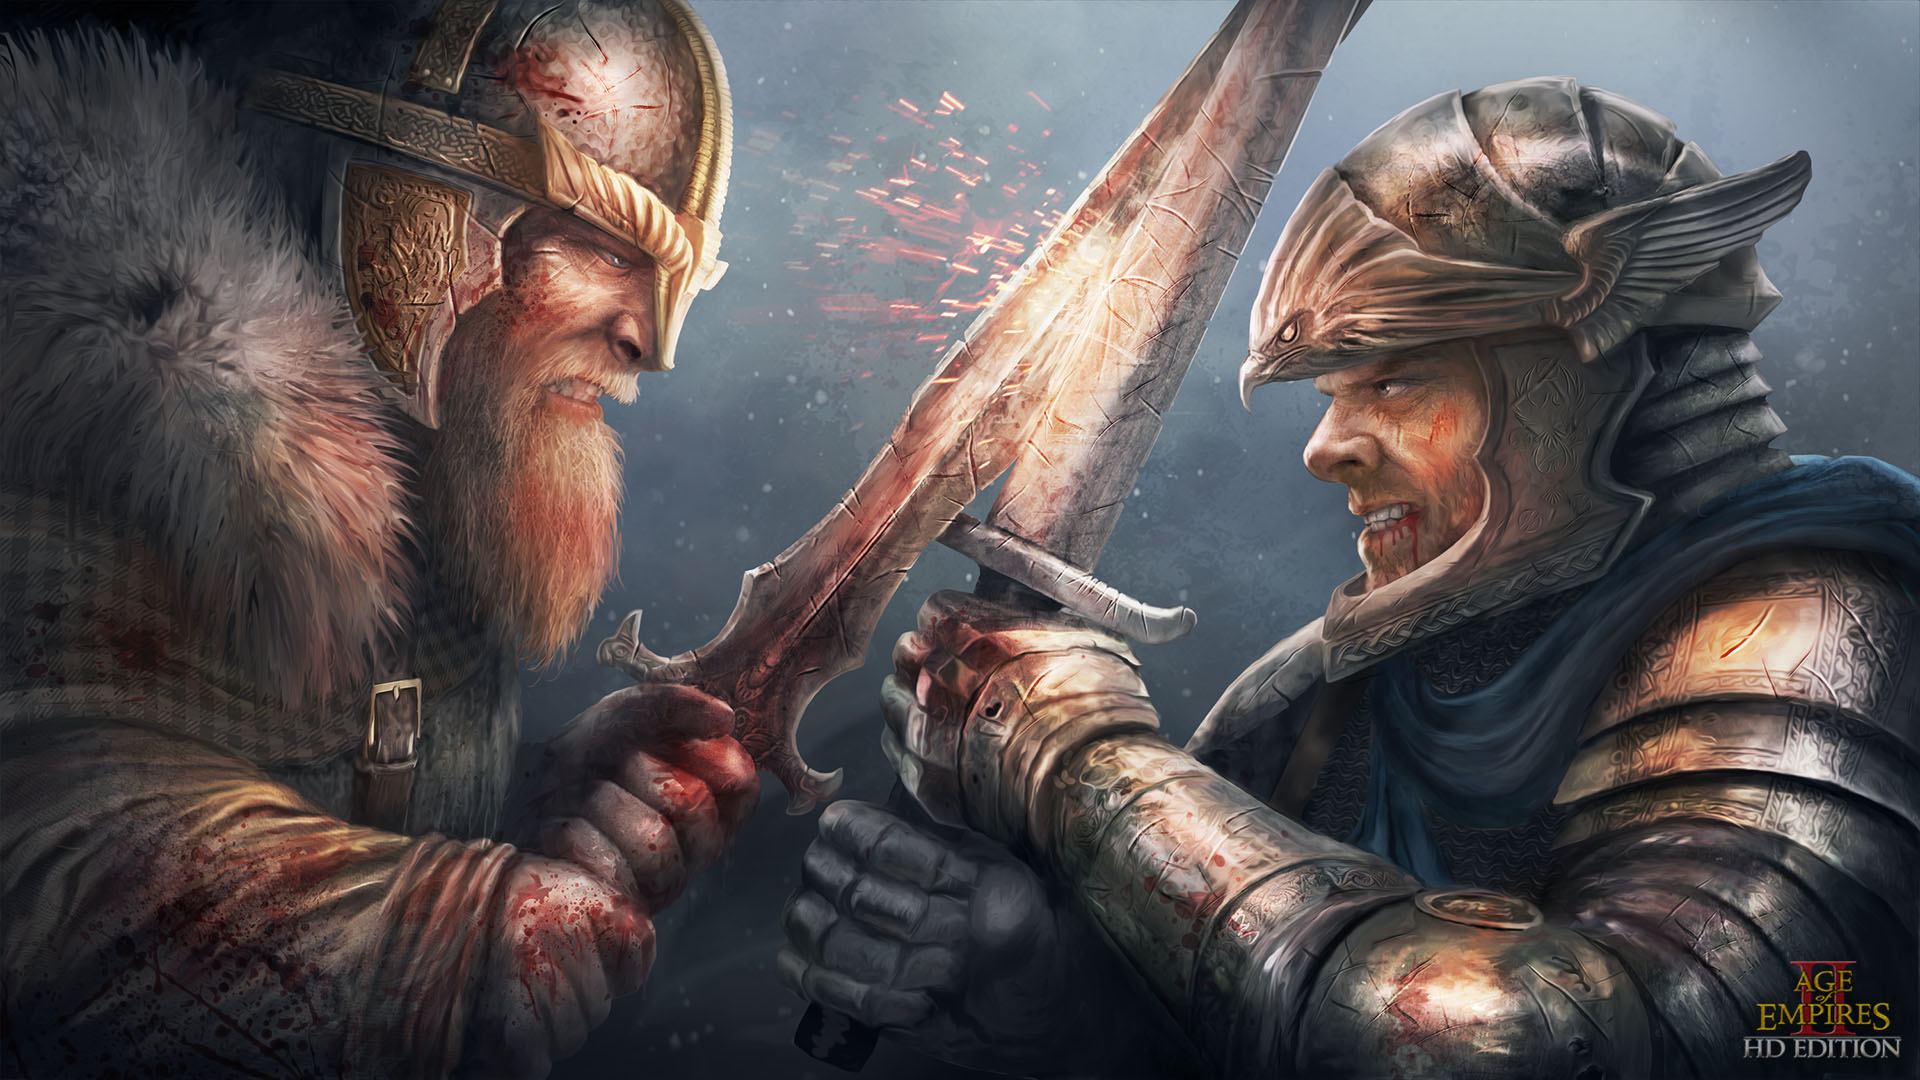 age of empires wallpaper,action adventure game,pc game,human,cg artwork,games